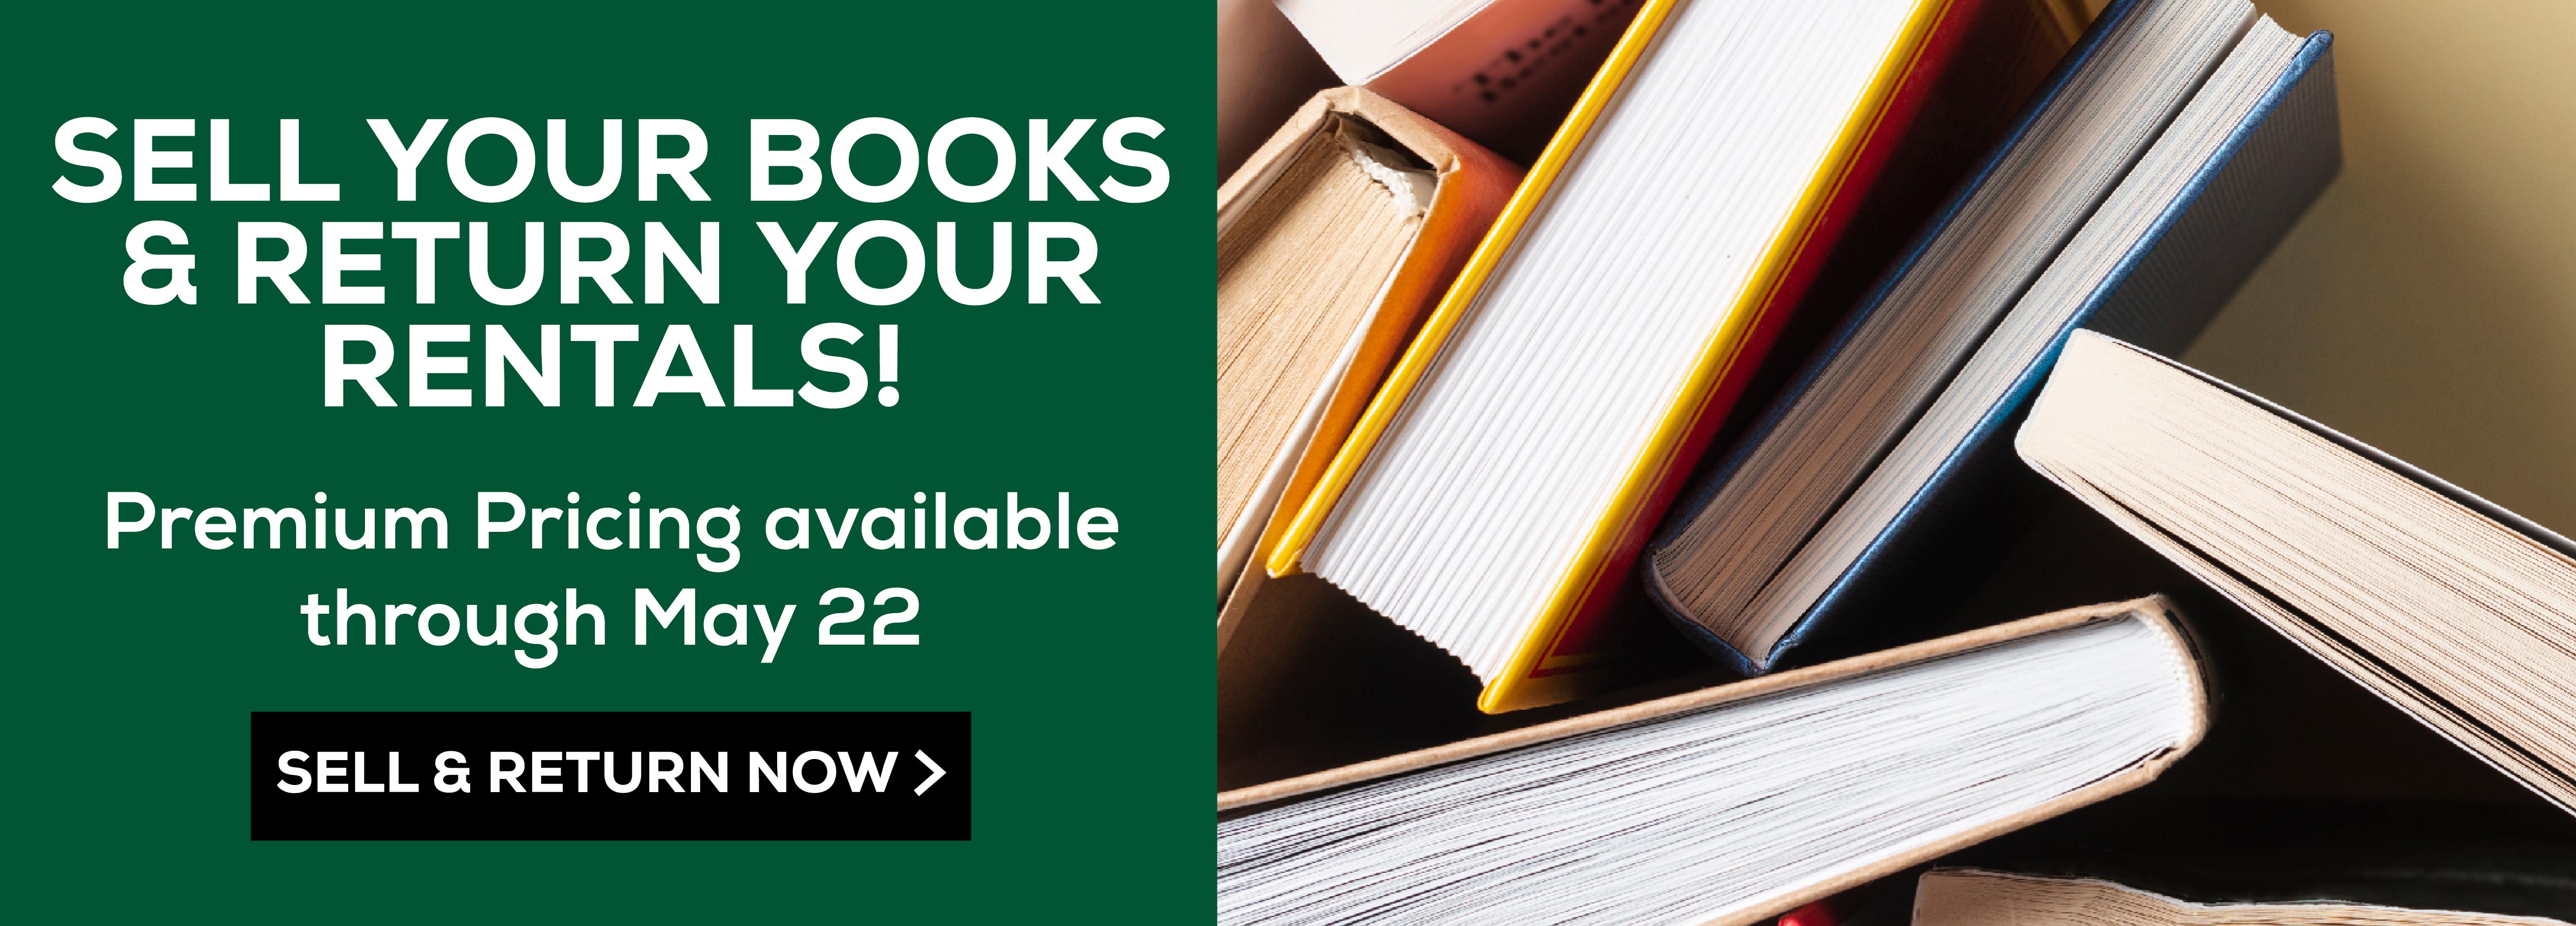 Sell Your Books & Return Your Rentals! Premium Pricing available through May 22 Sell & Return Now >